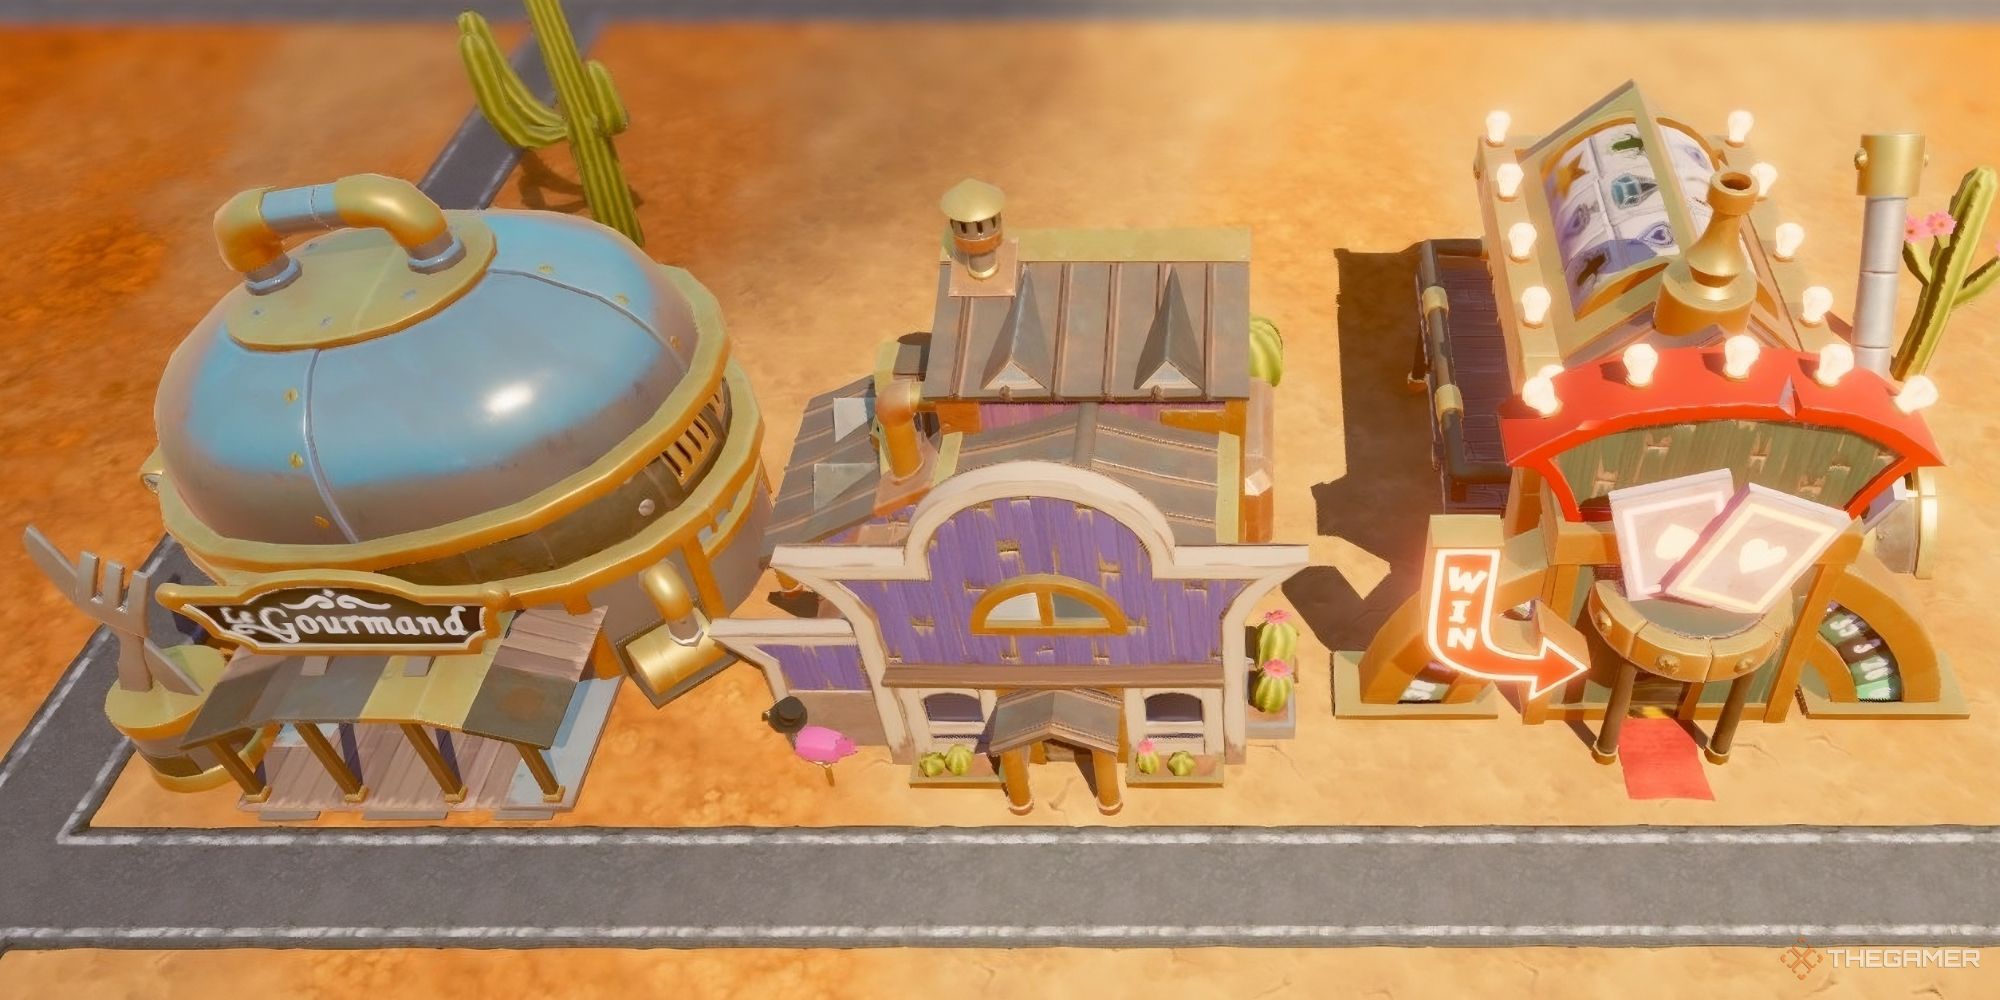 feature image showing the fine dining restaurant aristobot residential and casino in steamworld build